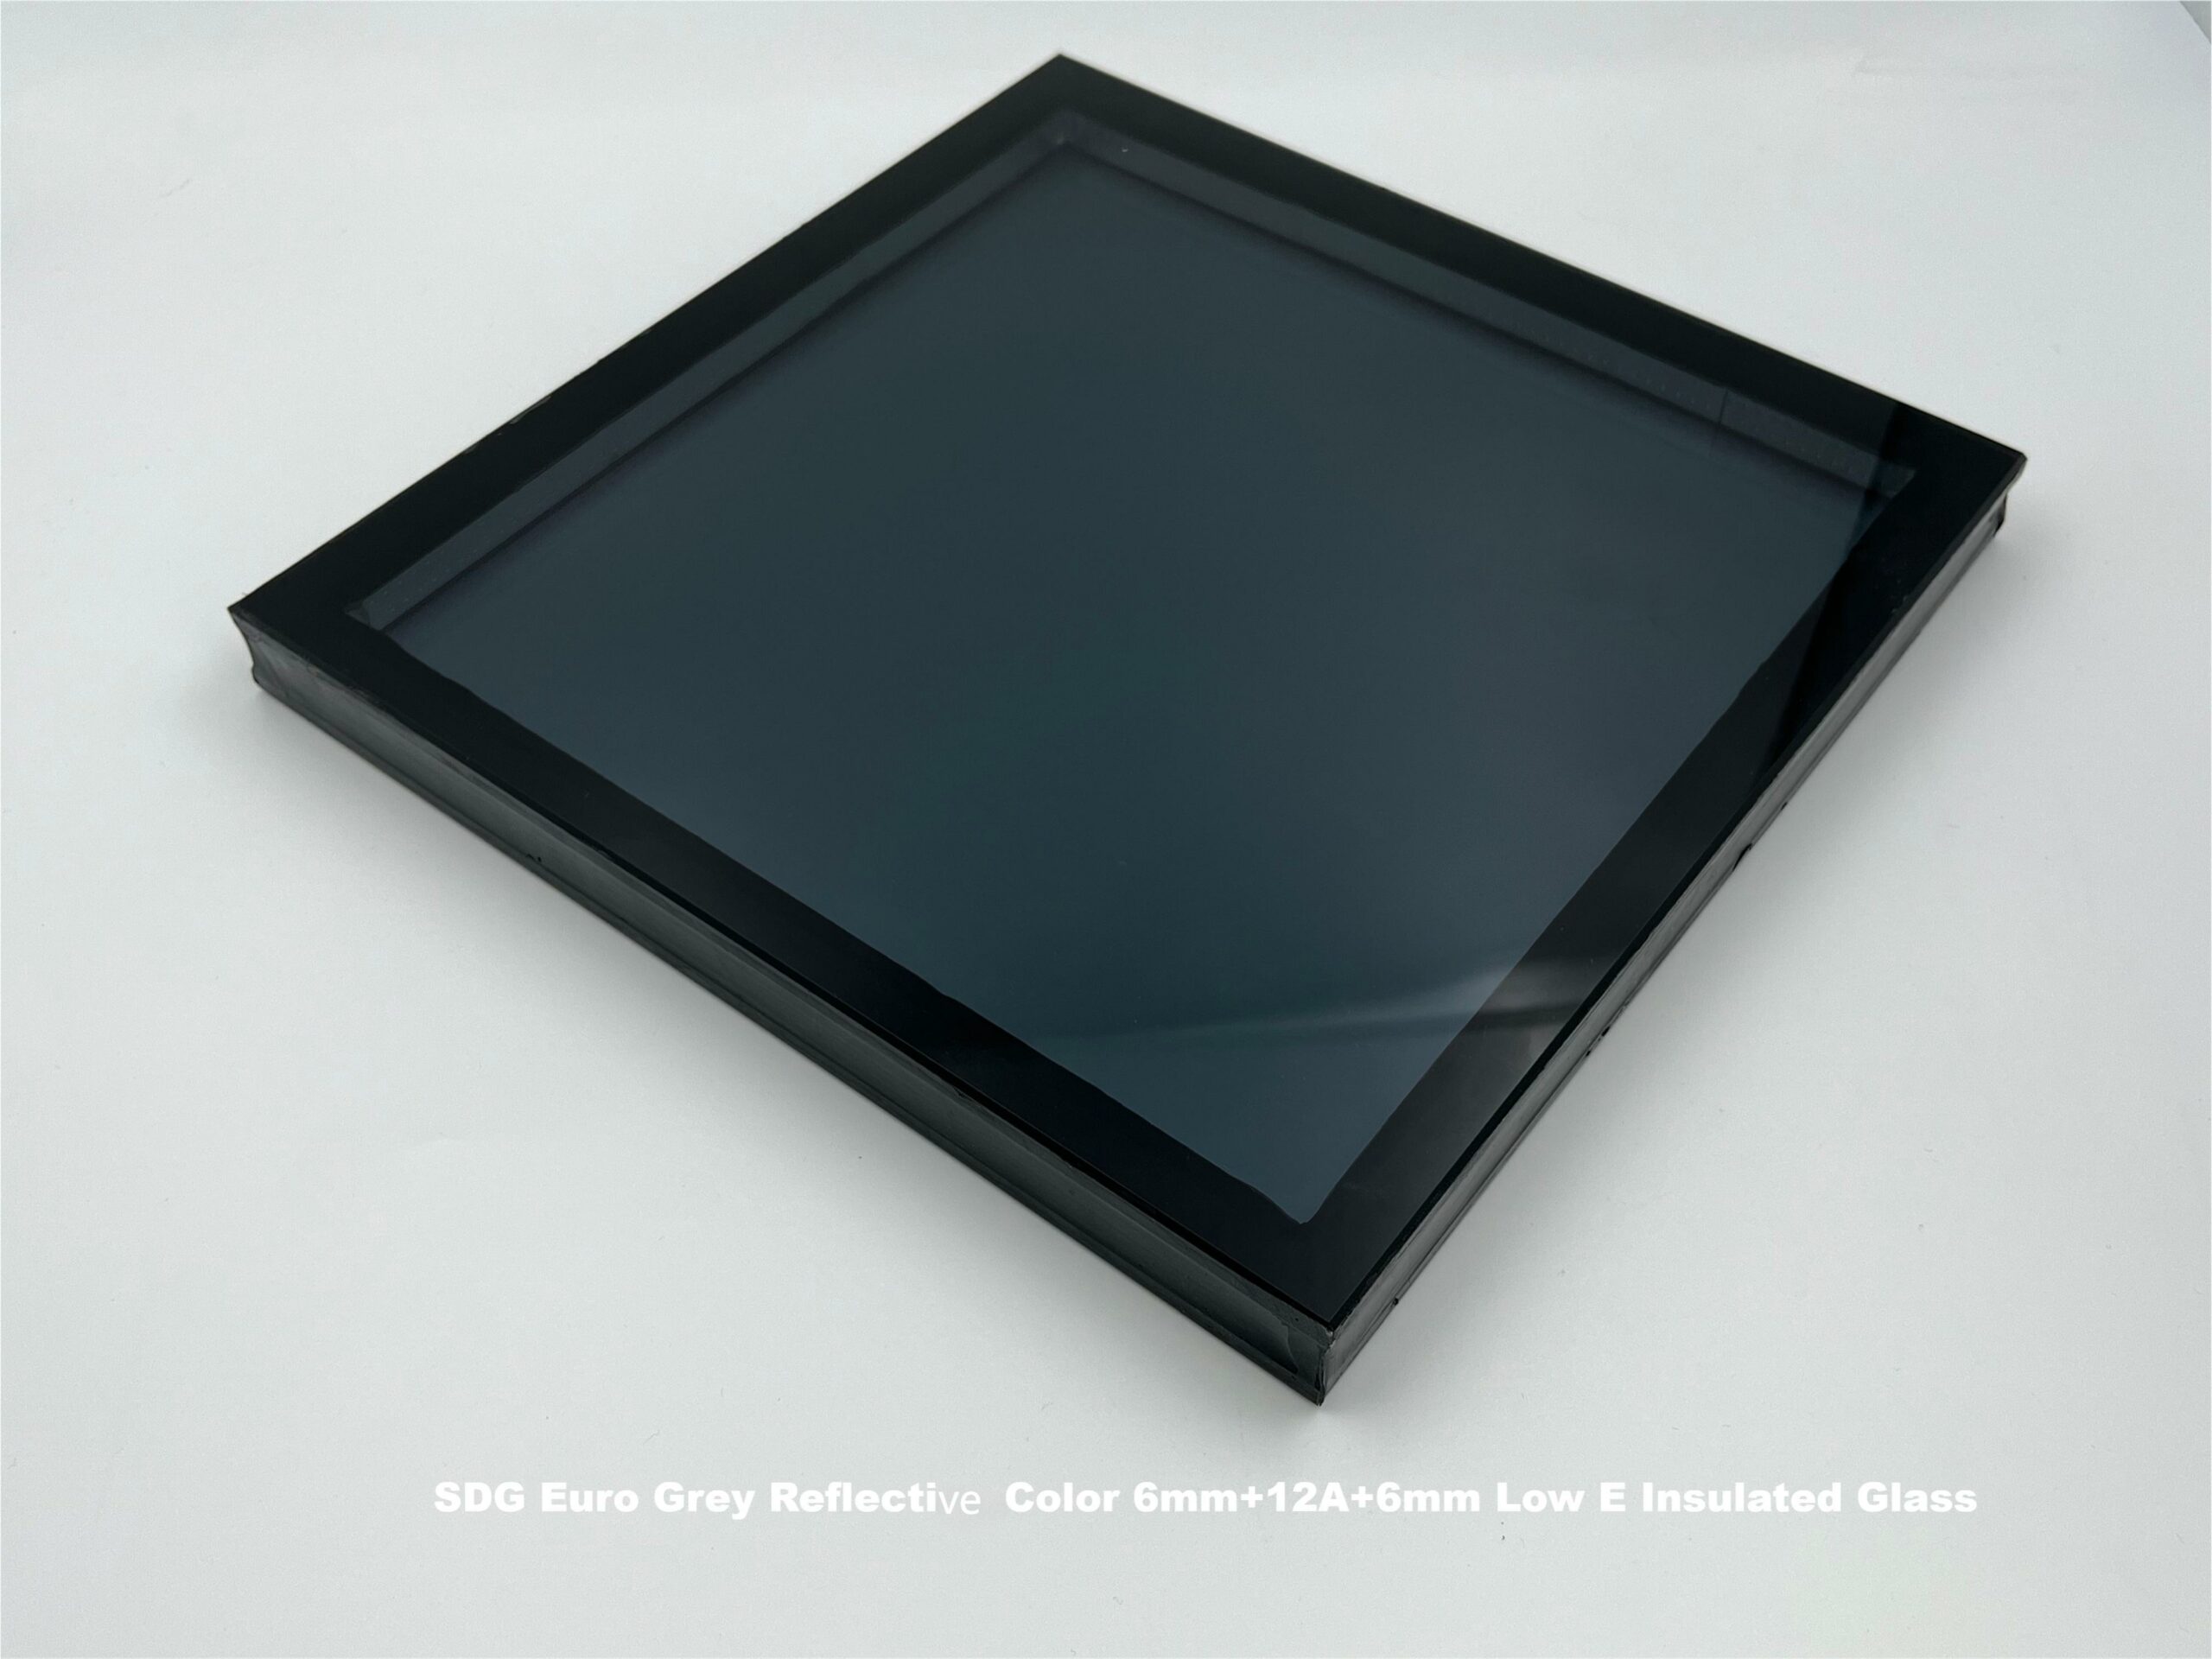 Superior Performance Euro Grey Reflective 6+12A+6 Low E Insulated Glass manufacturer in China